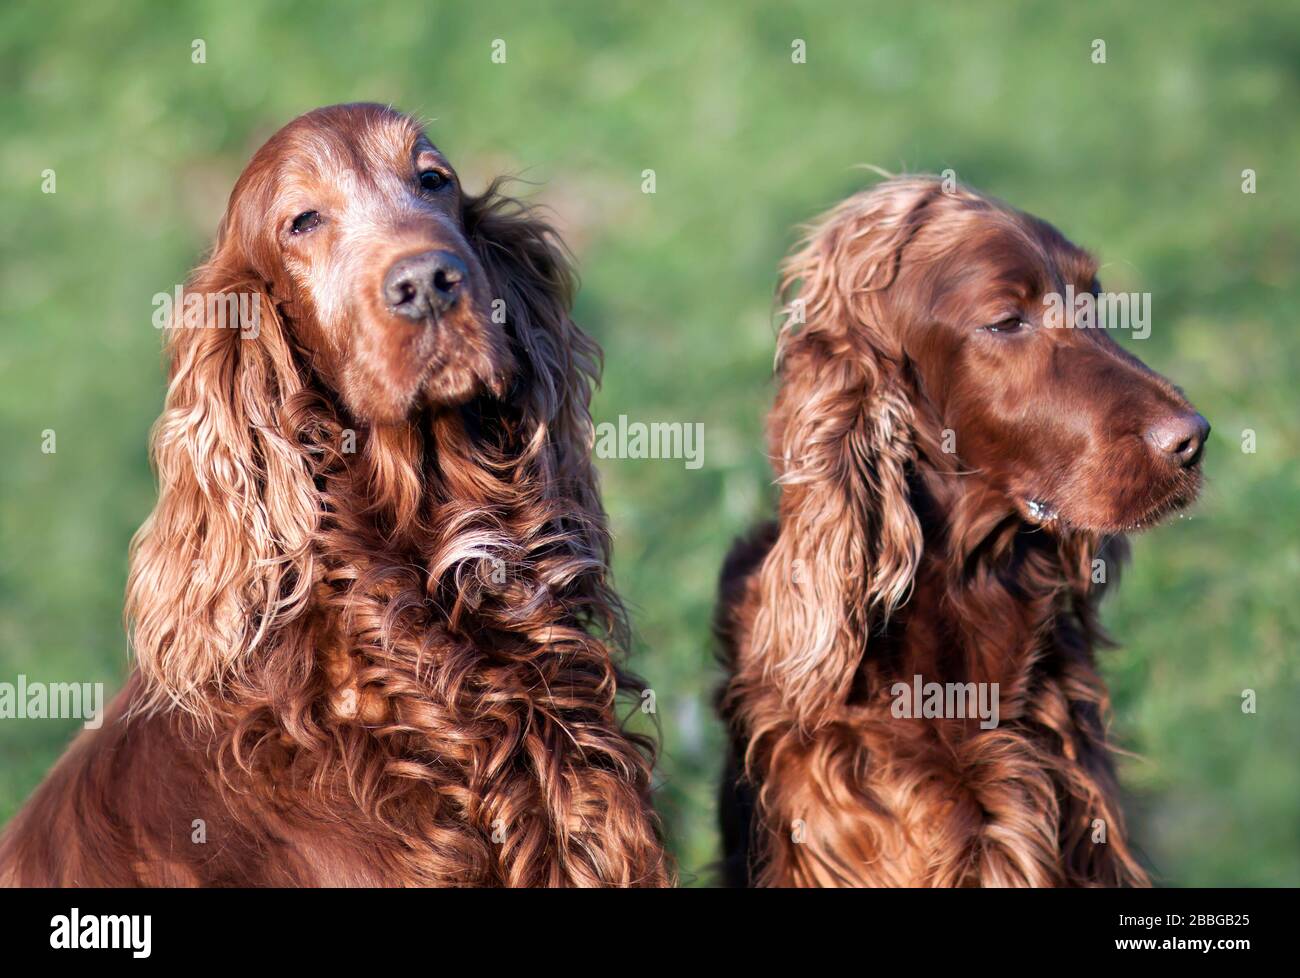 Dog love and care, beautiful furry irish setter dogs waiting for grooming Stock Photo